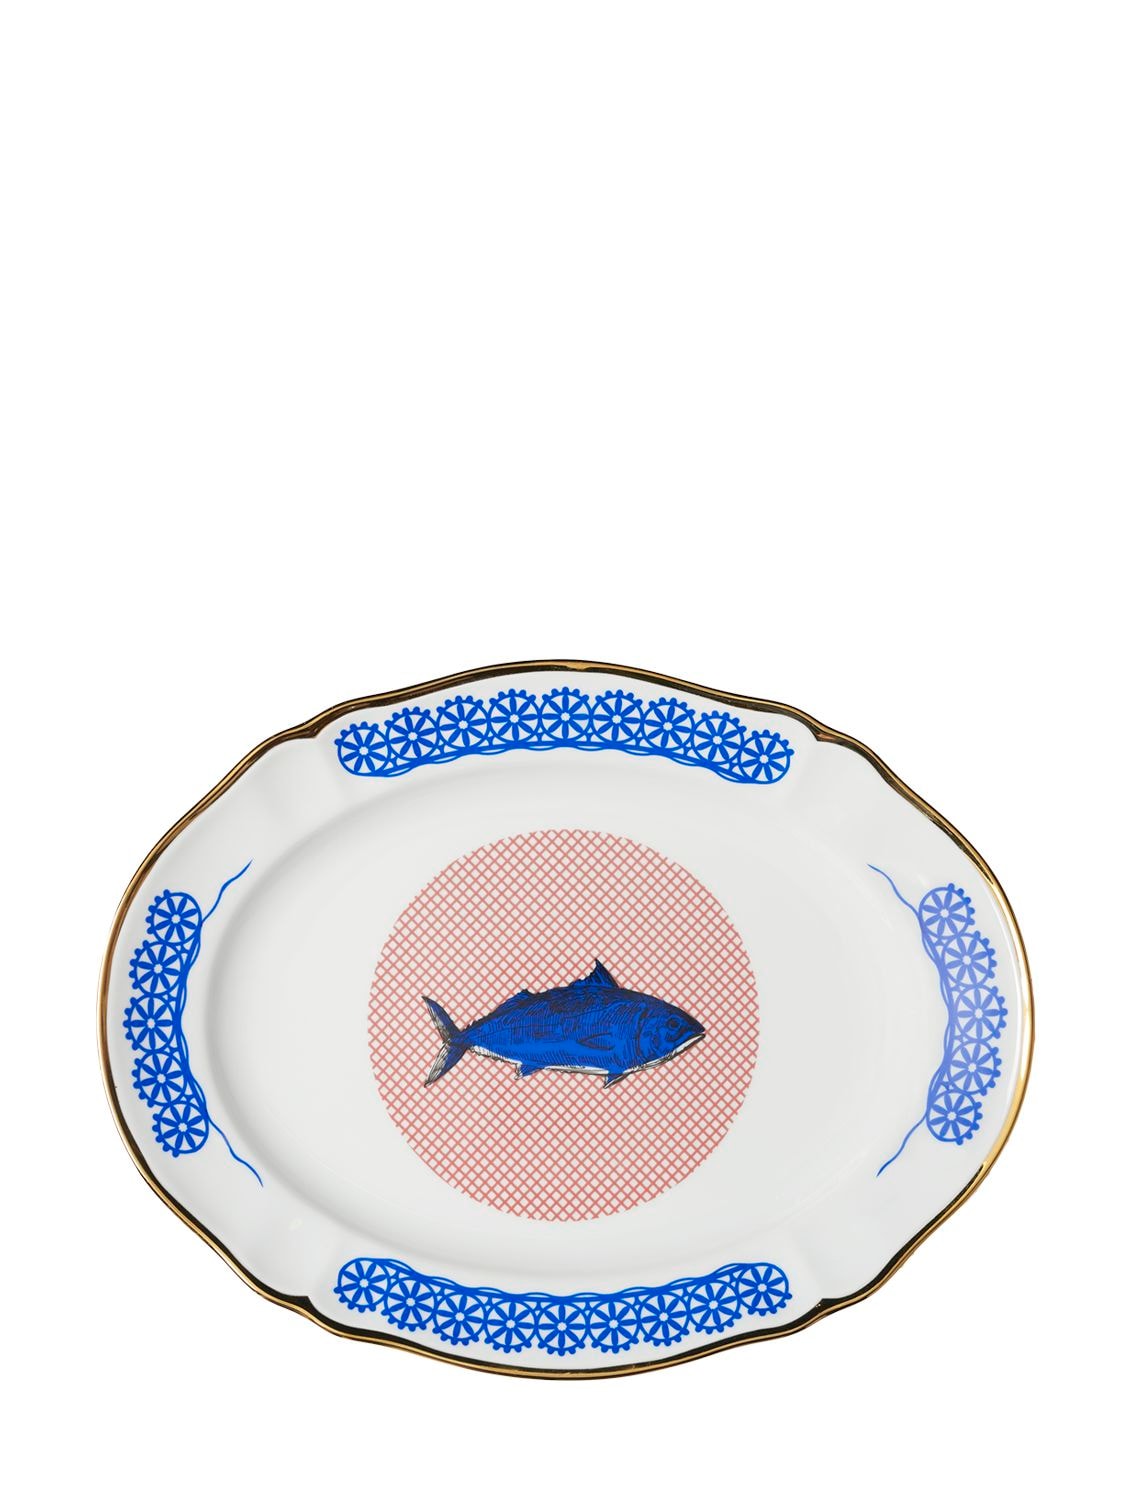 Image of Bel Paese Oval Platter